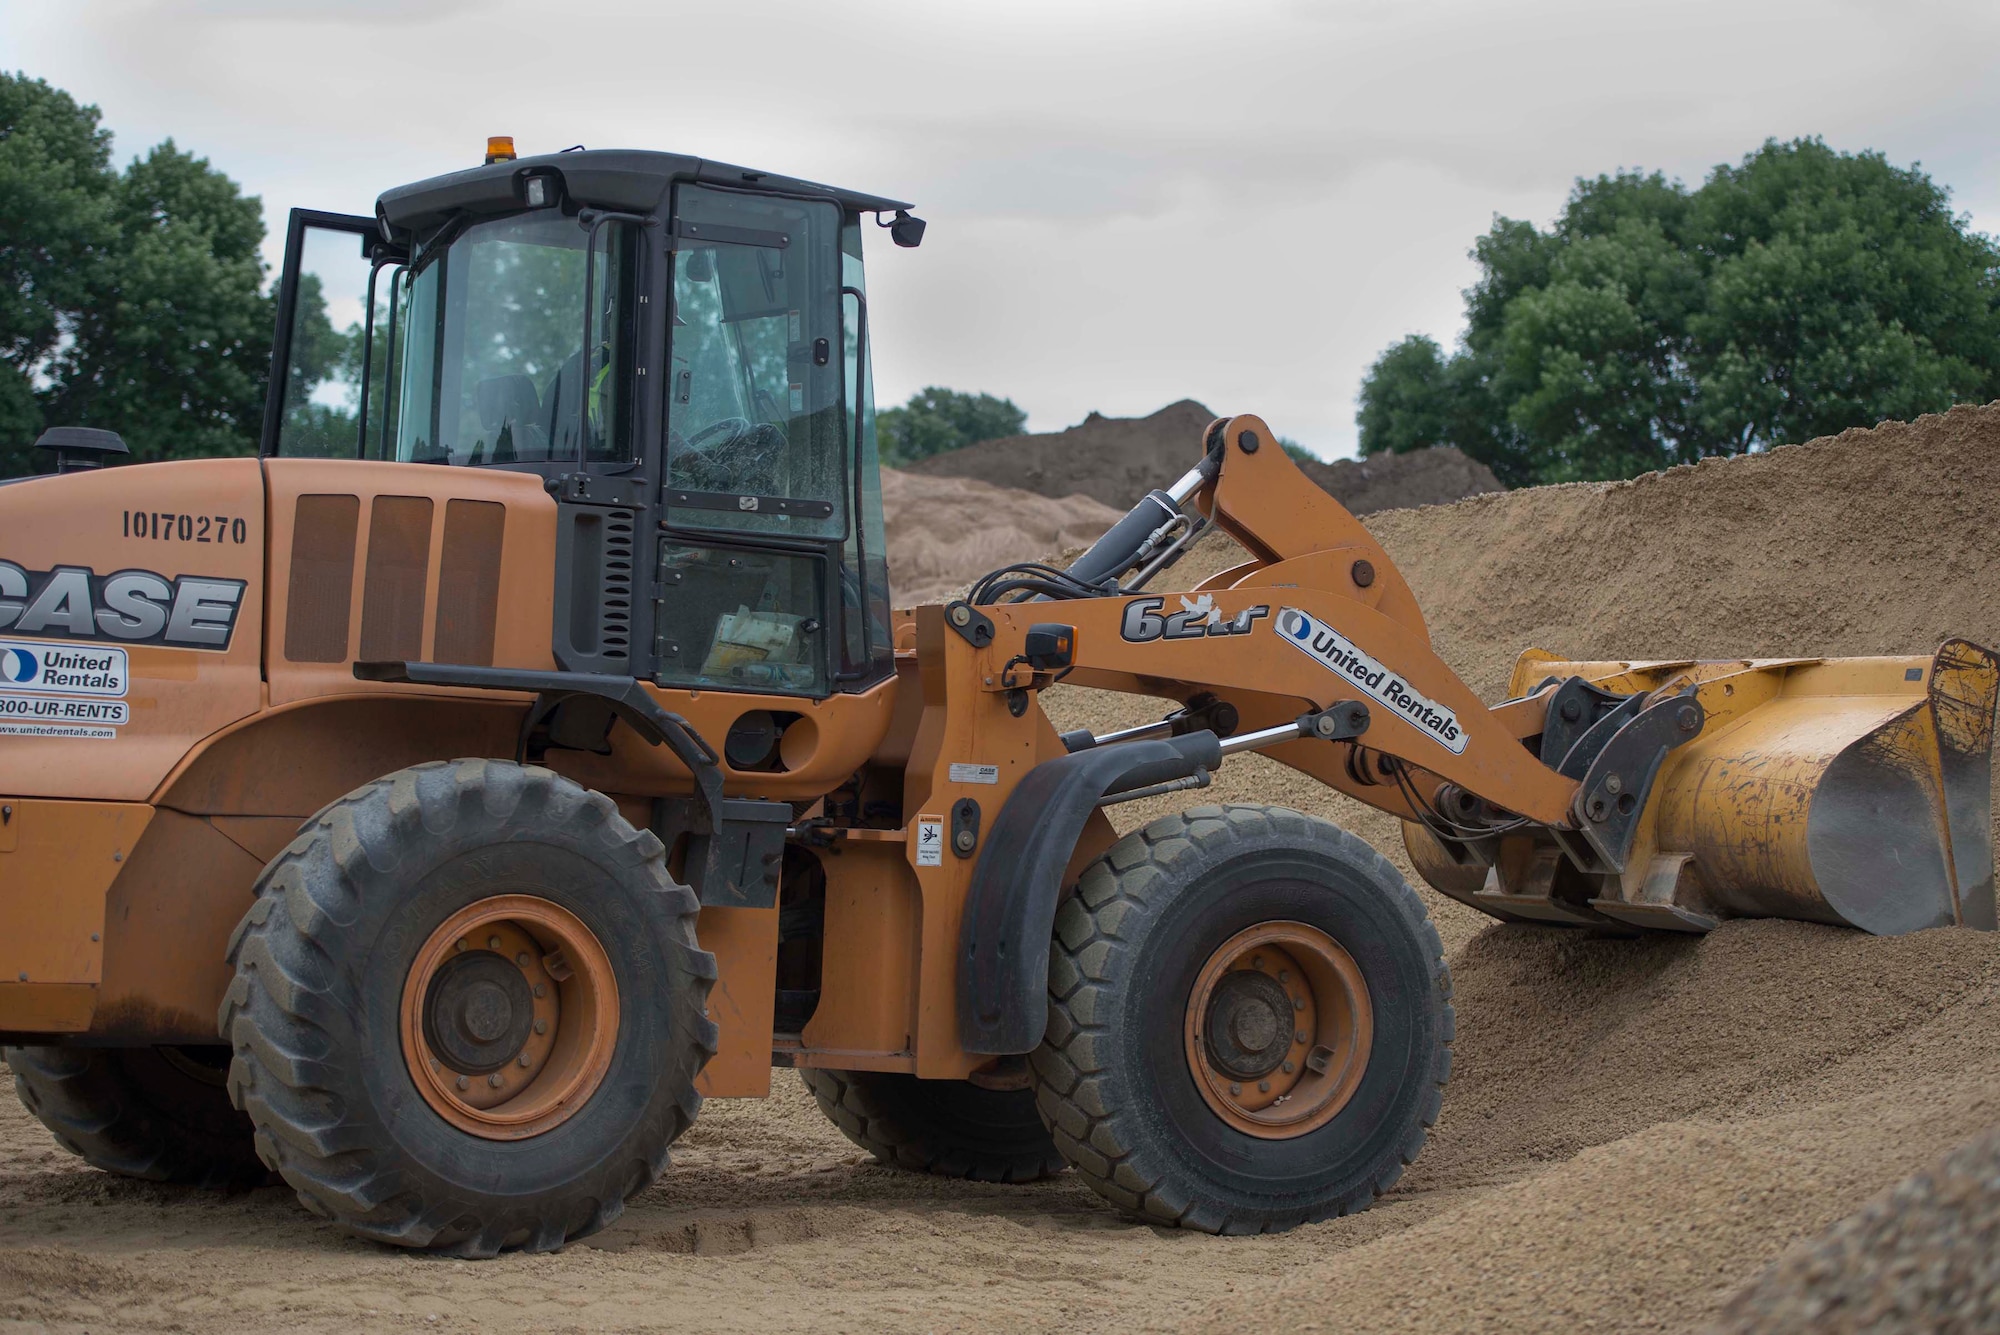 Master Sgt. Johnny Cunningham, 560th RED HORSE Squadron rotational NCO in charge, operates a front end loader at a construction site on Minneapolis-St. Paul Air Reserve Station, Minn., July 10, 2019.